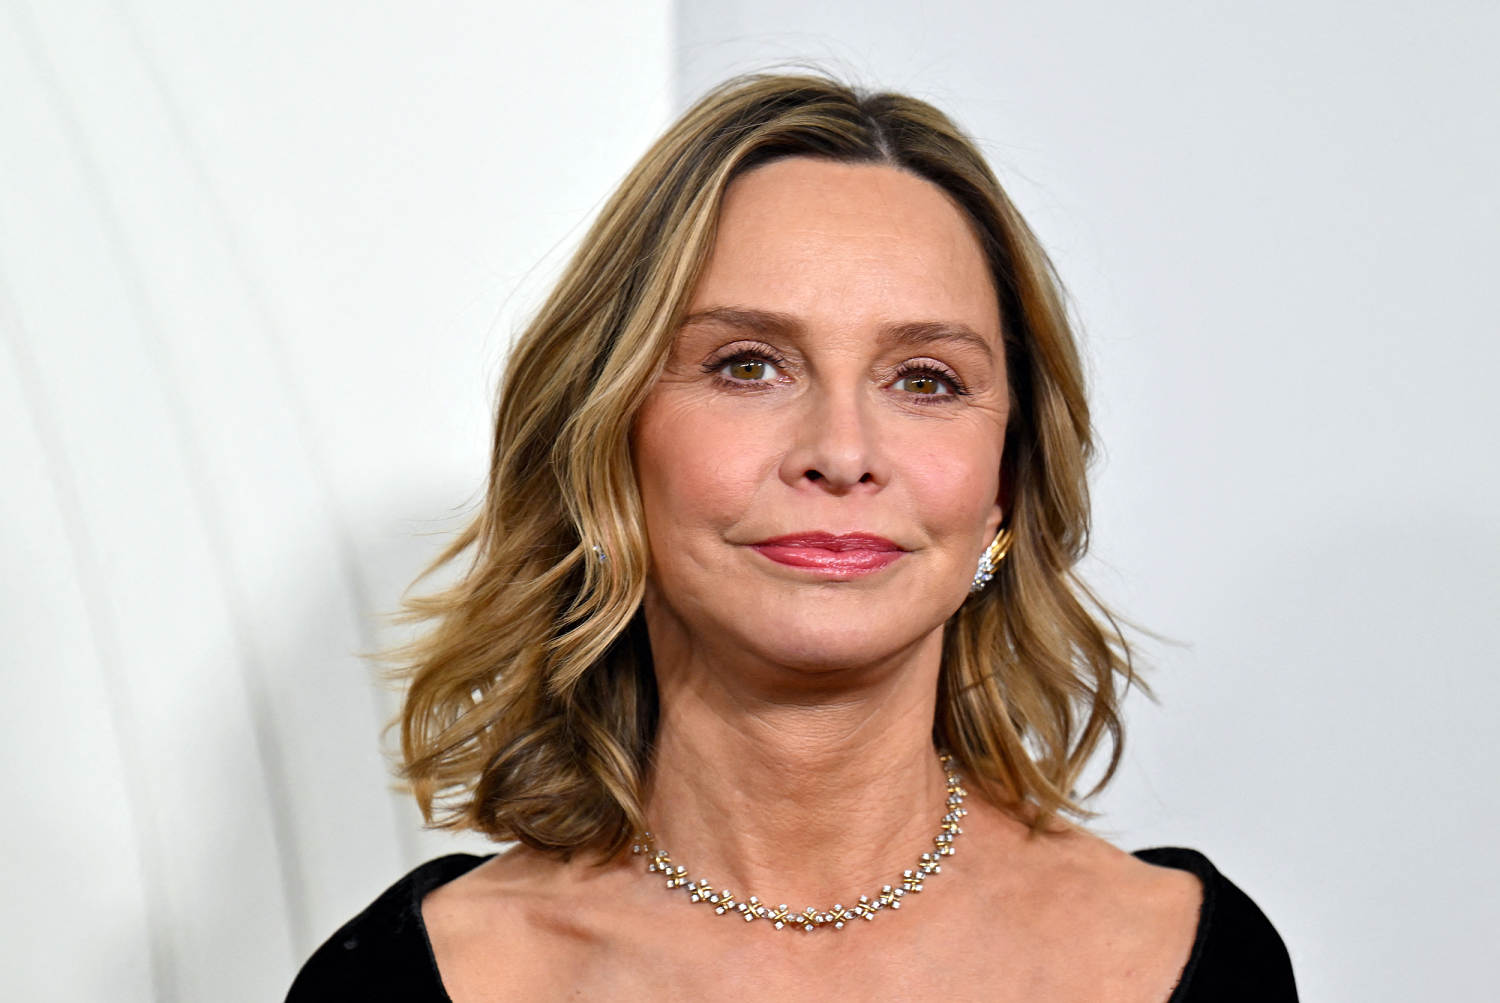 Calista Flockhart reflects on ‘painful’ anorexia rumors that she thought were going to ruin her career